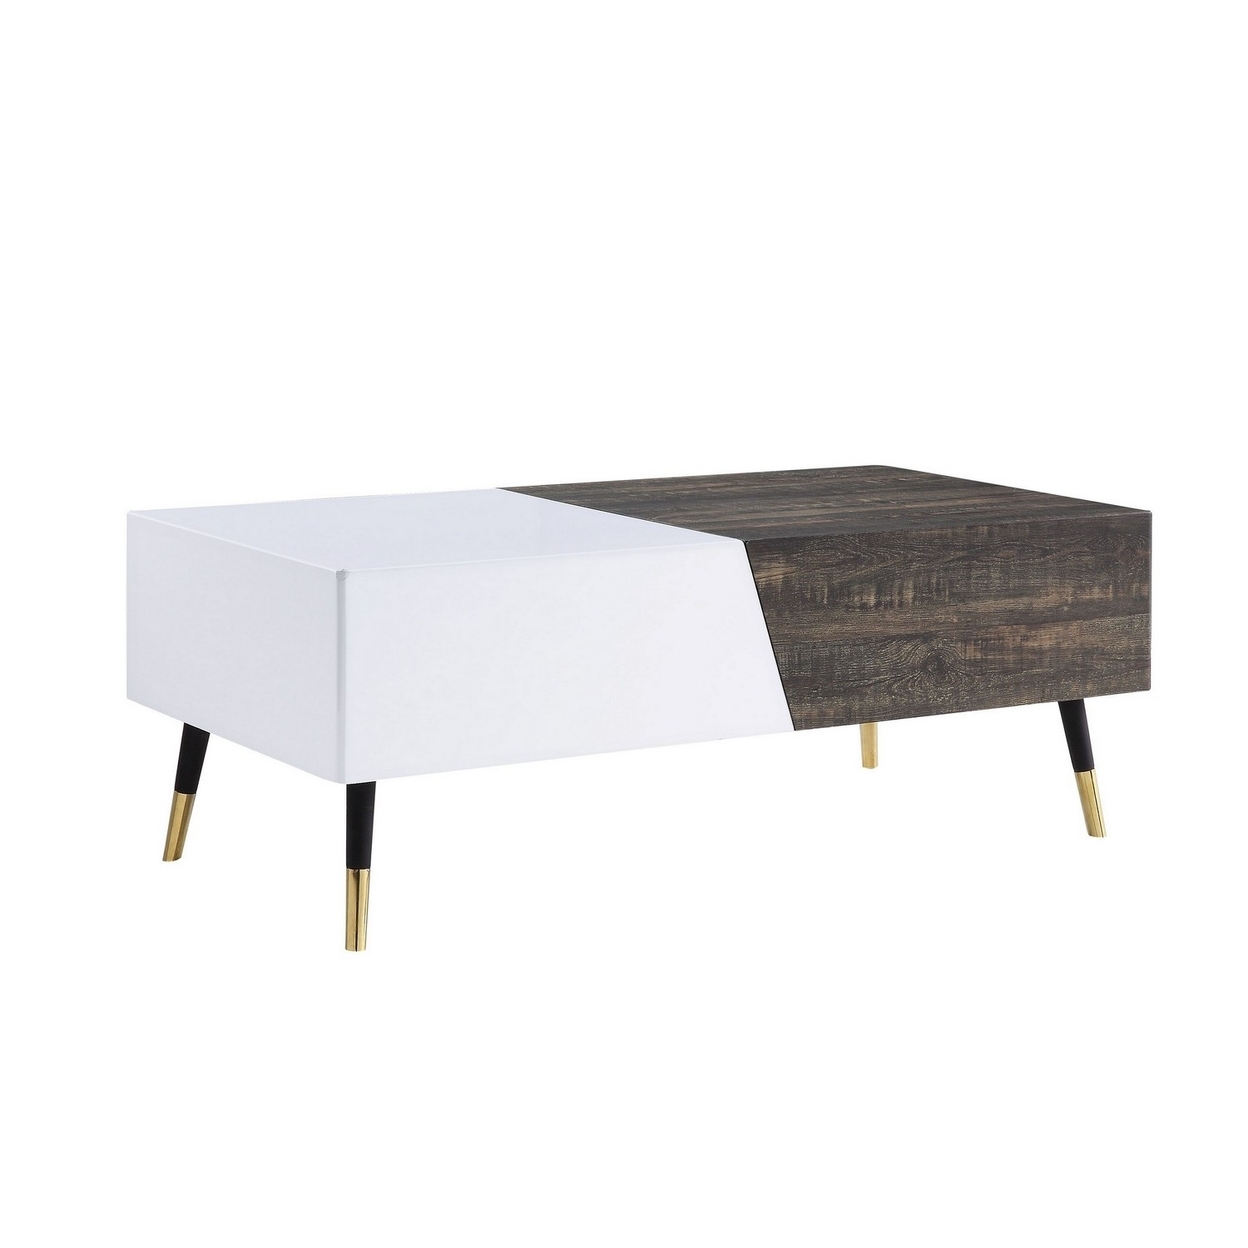 MDF Coffee Table With Sliding Top And 4 Hidden Compartments,White And Brown- Saltoro Sherpi